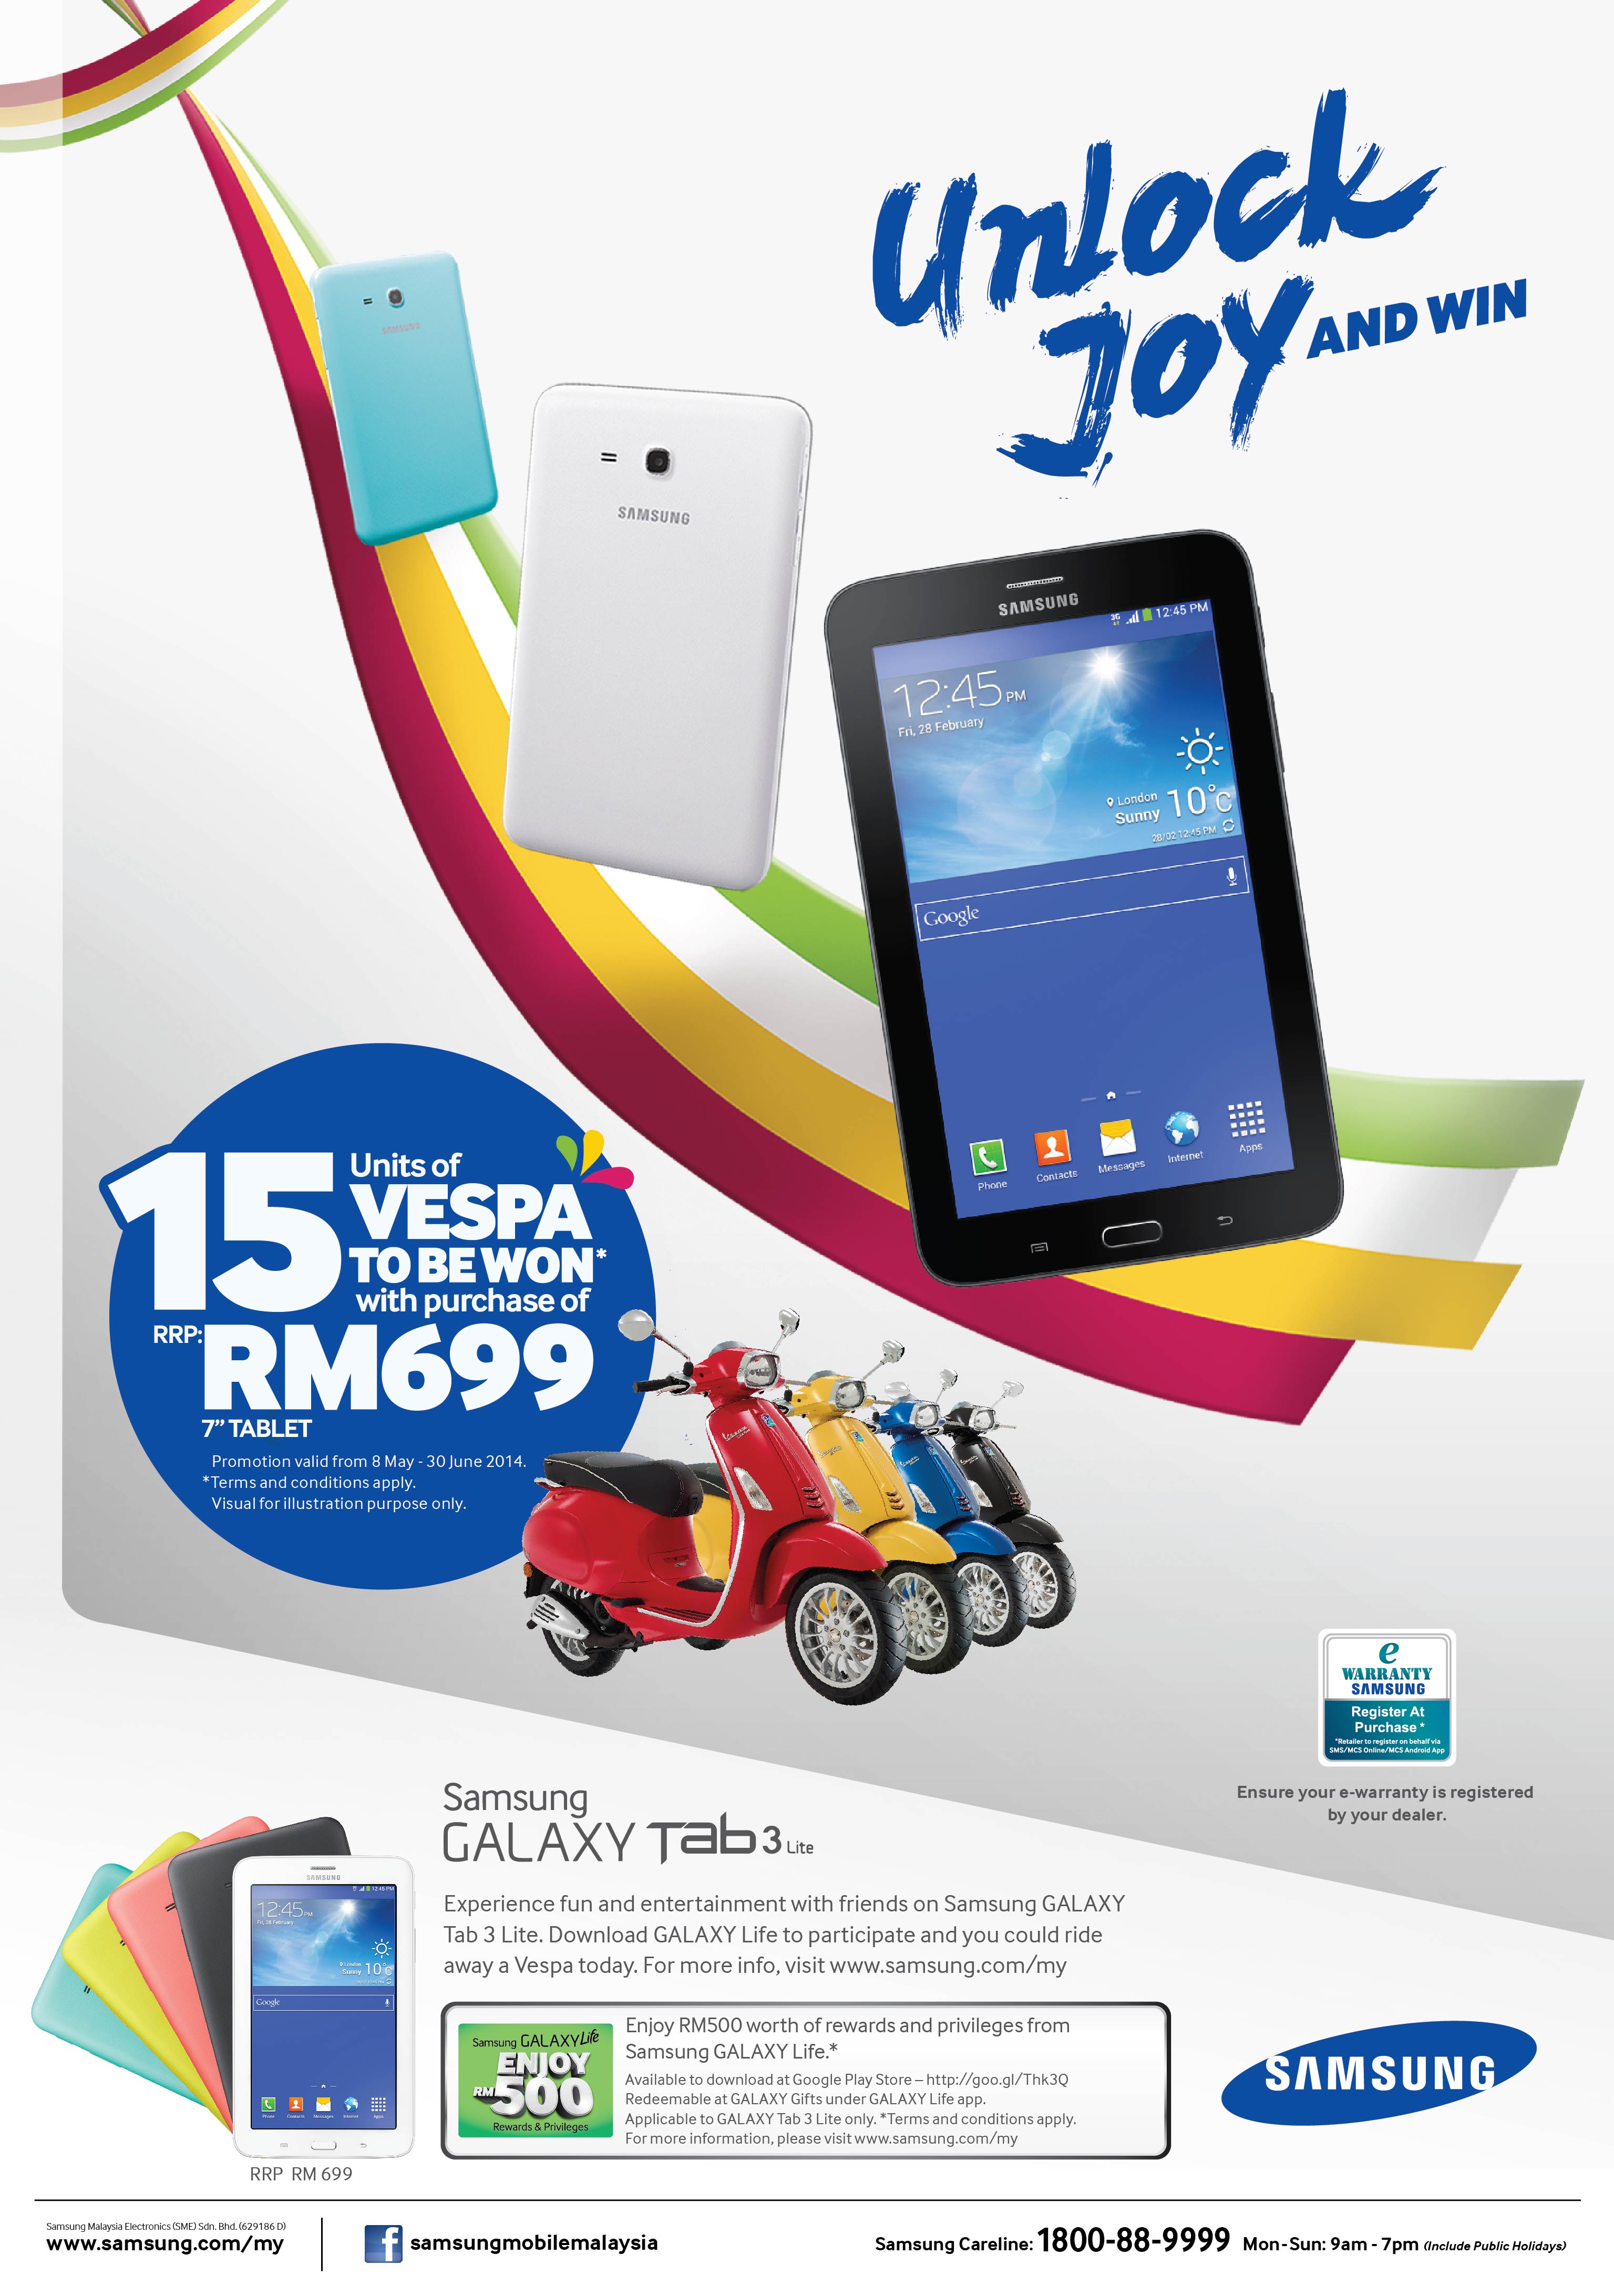 Buy A Samsung Galaxy Tab 3 Lite And Stand A Chance To Win 1 of 15 Vespas | Lowyat.NET